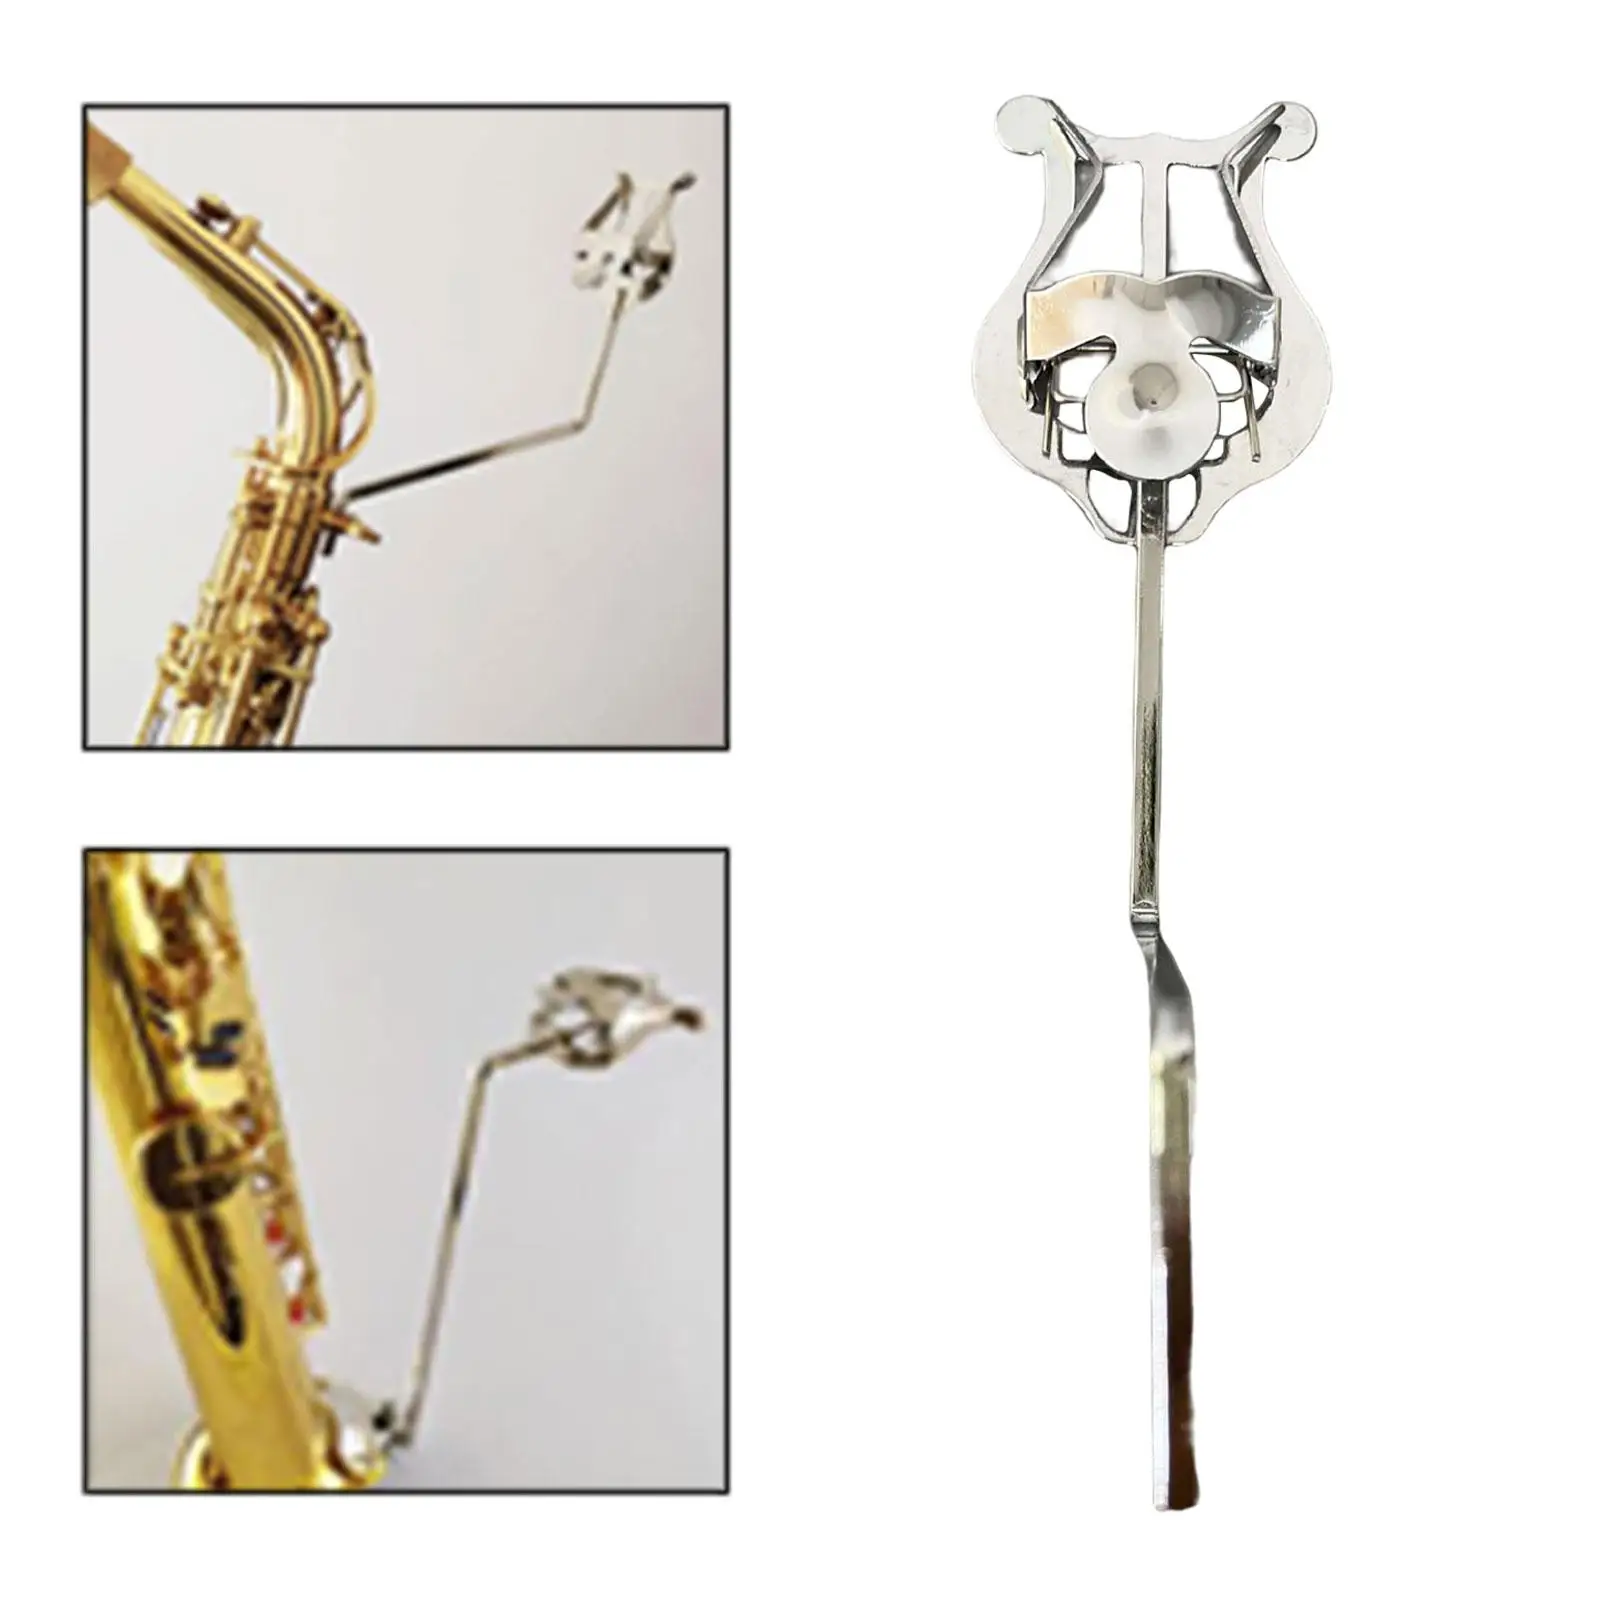 Metal Marching Lyre Clamp Trumpet Marching Clamp for Saxophone Accessory